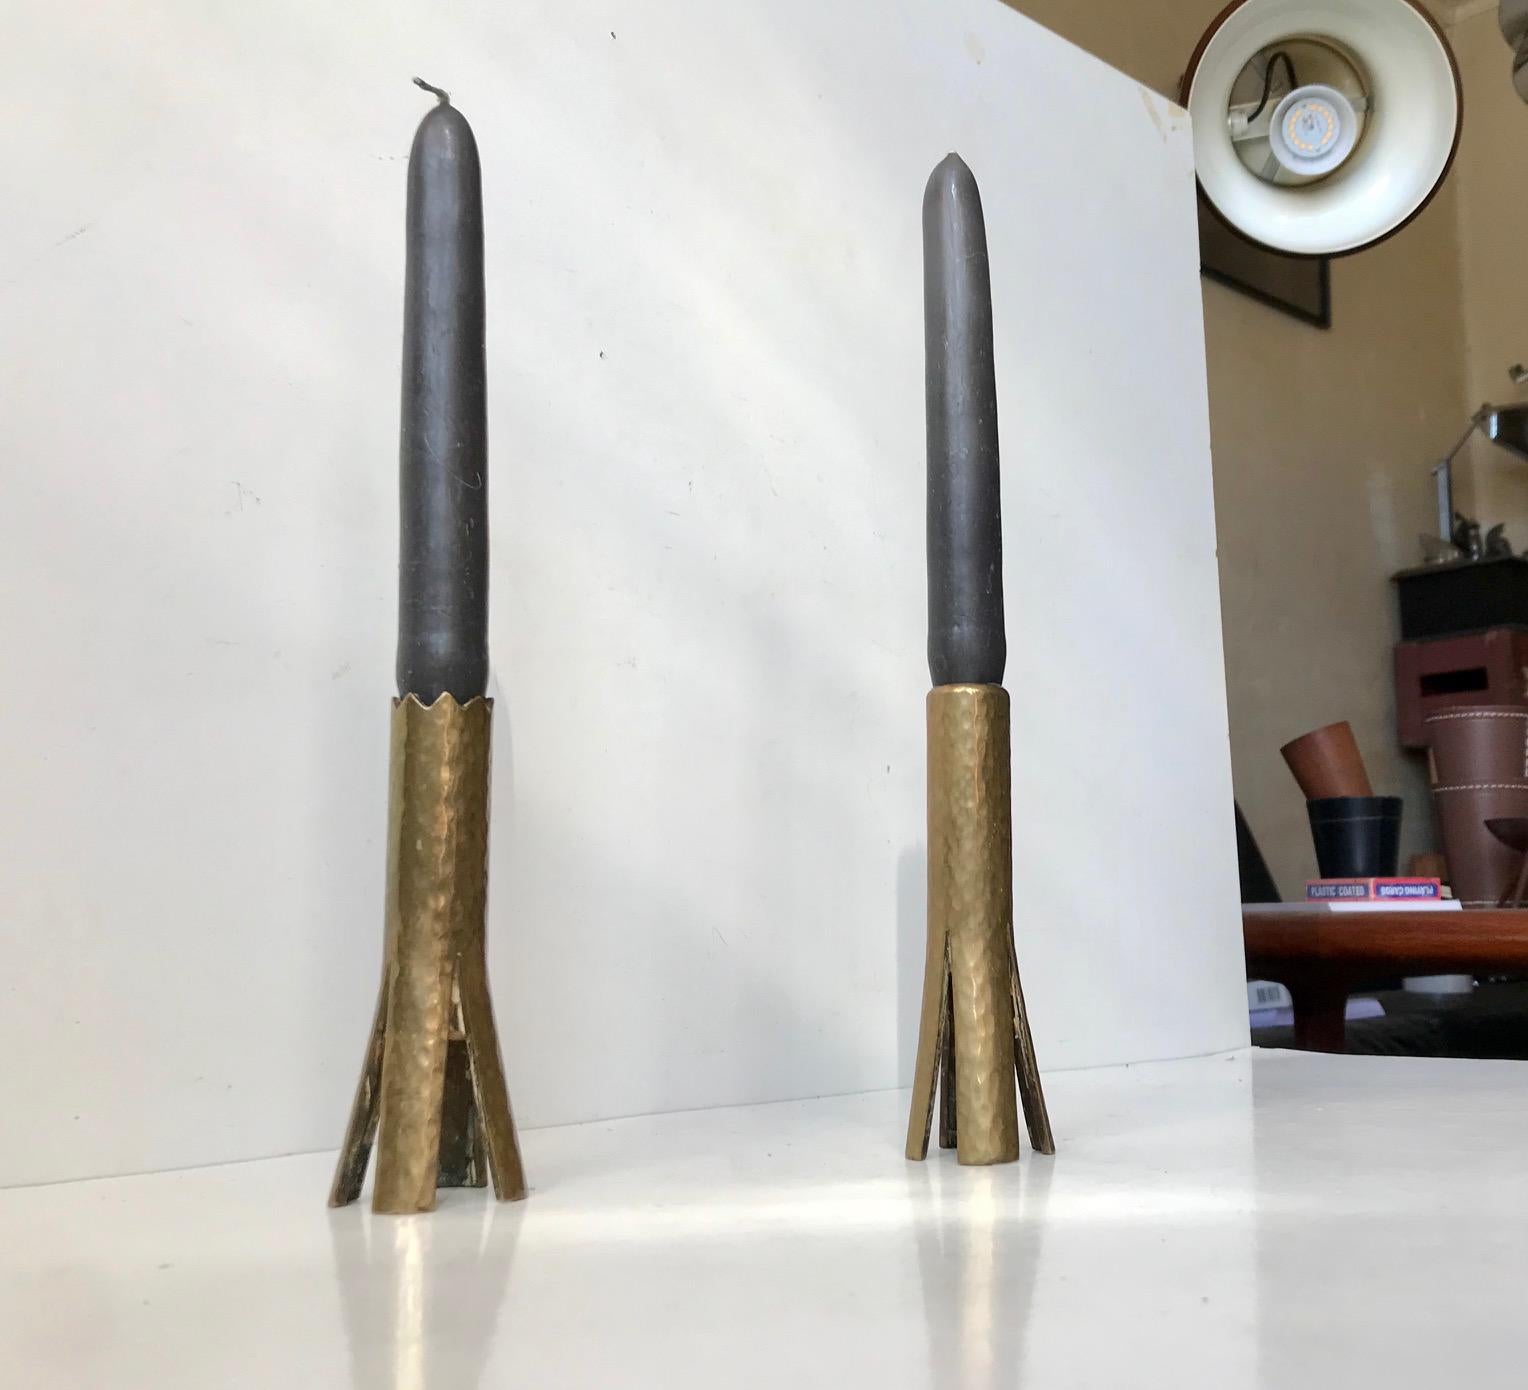 Unusual pair of hammered brass candlesticks featuring split bases and saw teeth. Made anonymously in Scandinavia, probably Finland, during the early to mid 1960s. We suspect that they are either a prototype that never came into production or made by